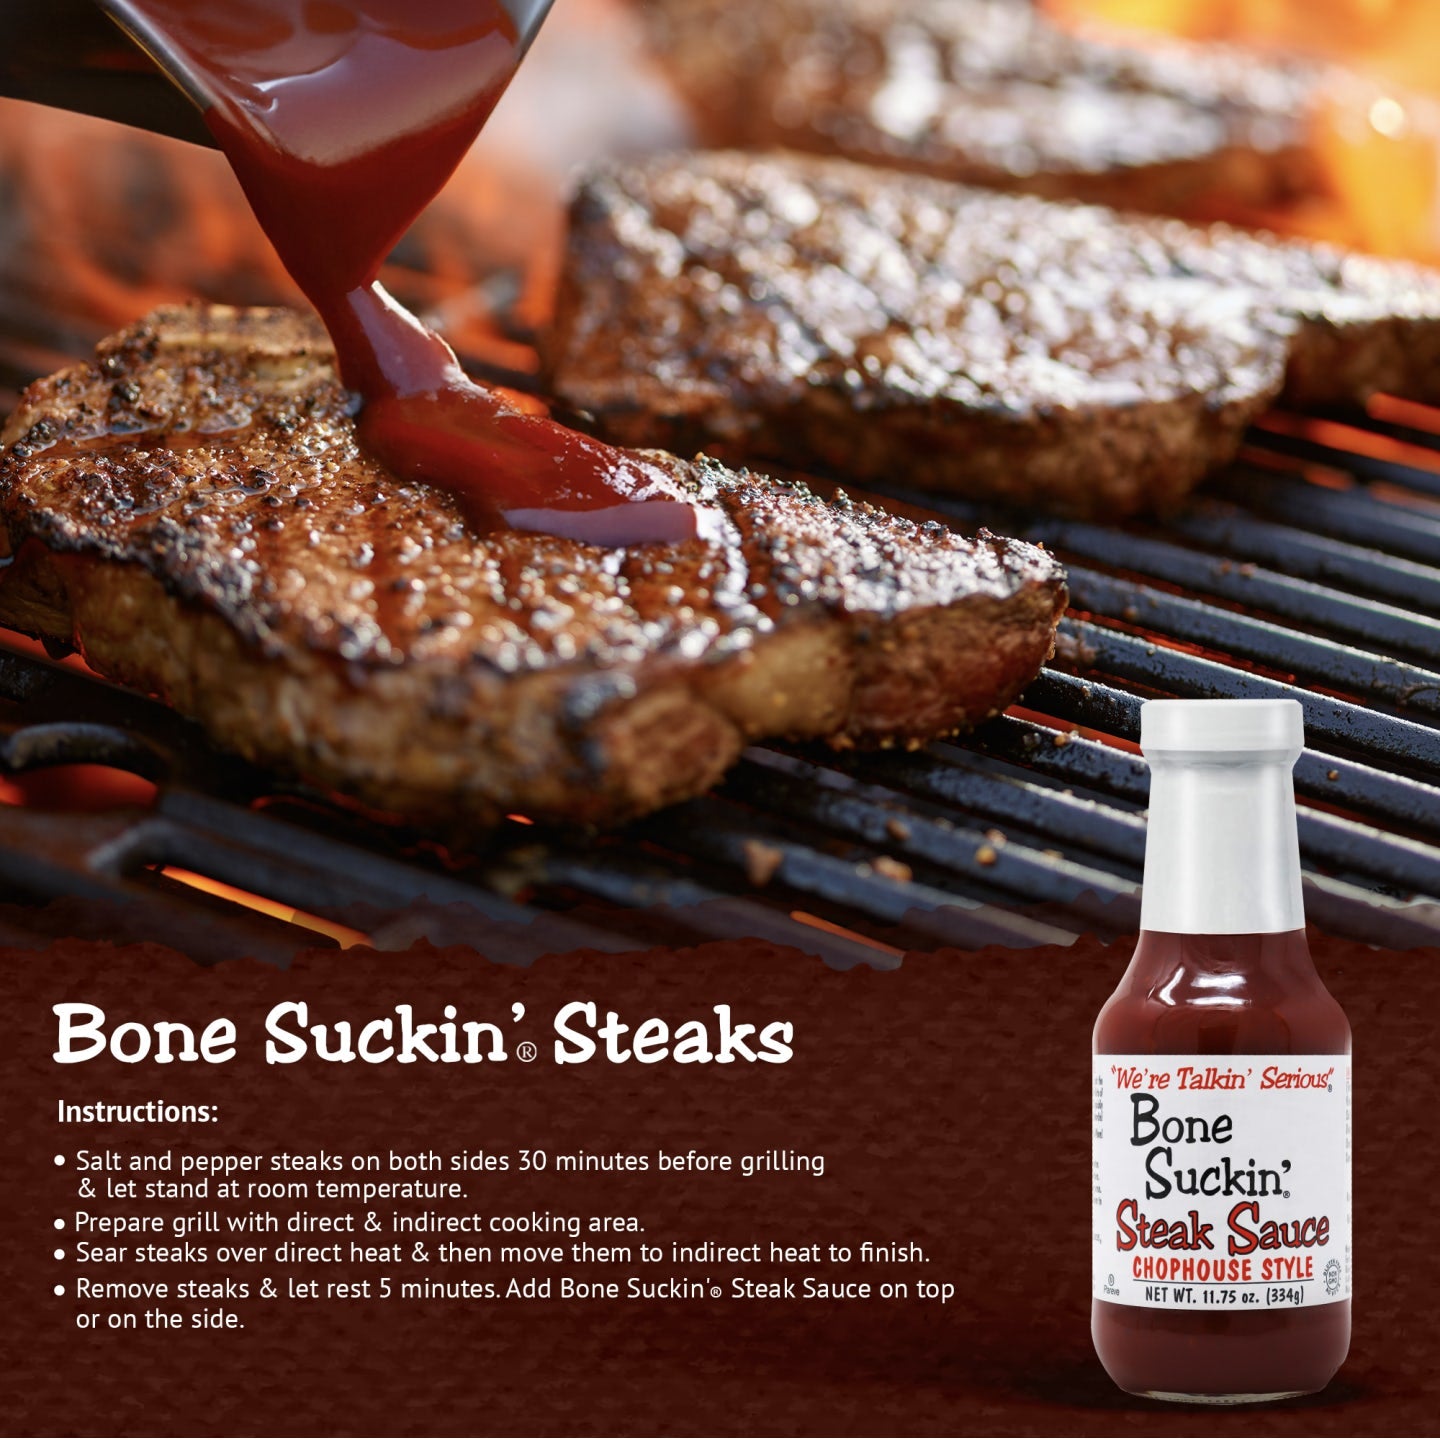 Bone Suckin' Steak Sauce, steak recipe. Salt and pepper steaks of choice on both sides 30 minutes before grilling and let stand at room temperature. Prepare grill with direct and indirect cooking area. Sear steaks over direct heat and them move them to indirect heat to finish.  Remove steaks  and let steaks rest for 5 minutes. Add Bone Suckin Steak Sauce on top or serve on the side. 